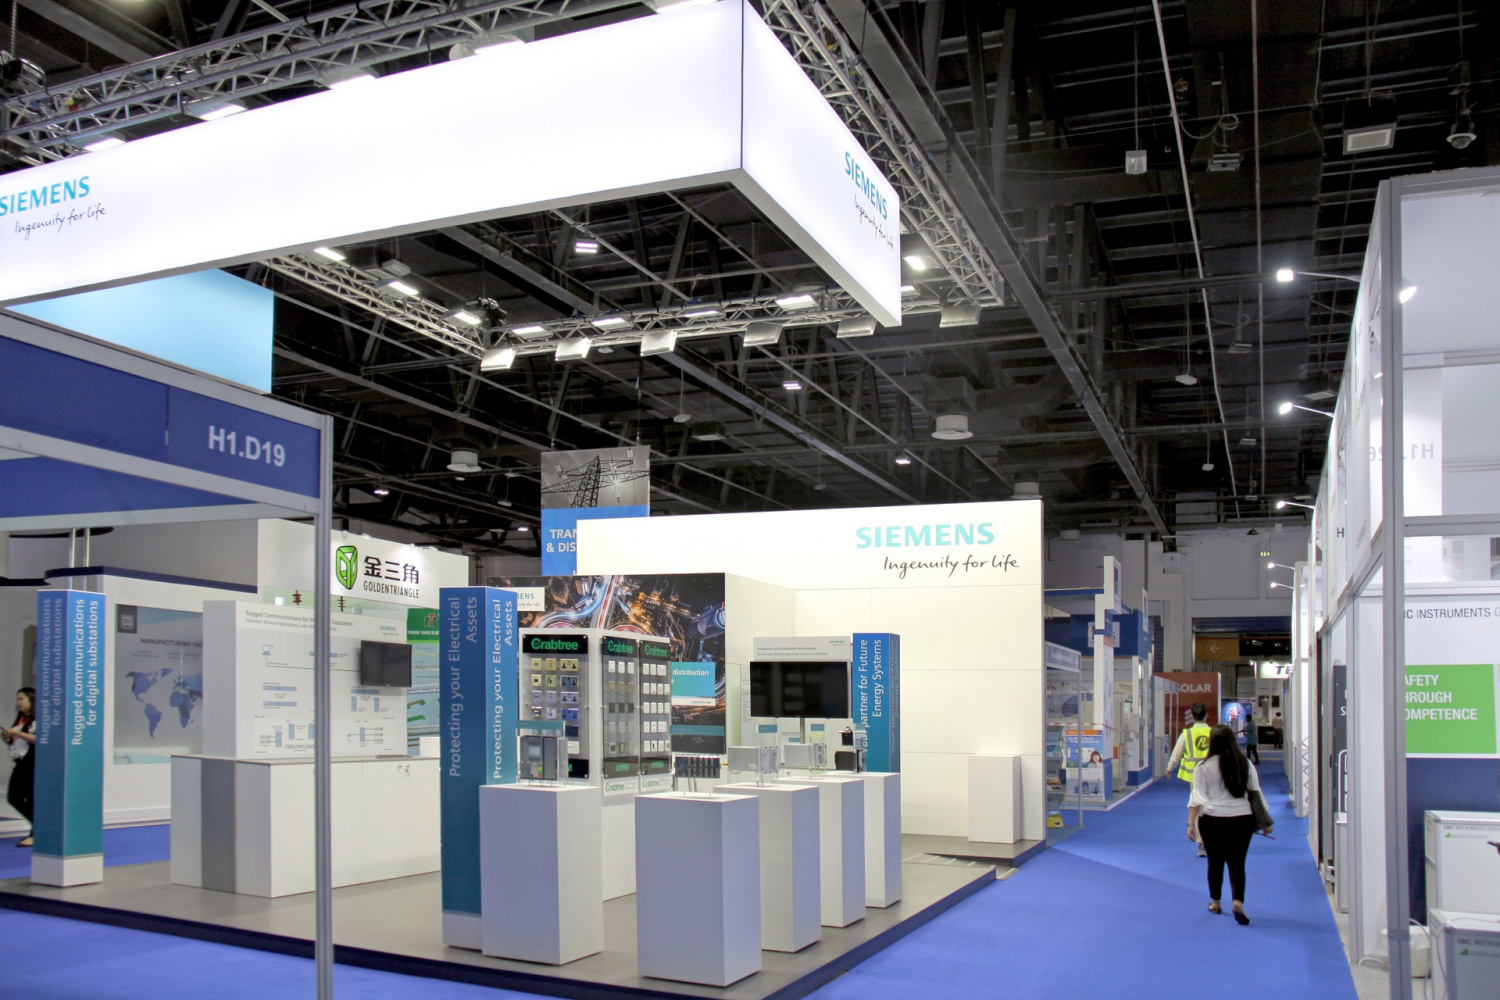 Siemens Industrial stand on Middle East Electricity exhibition